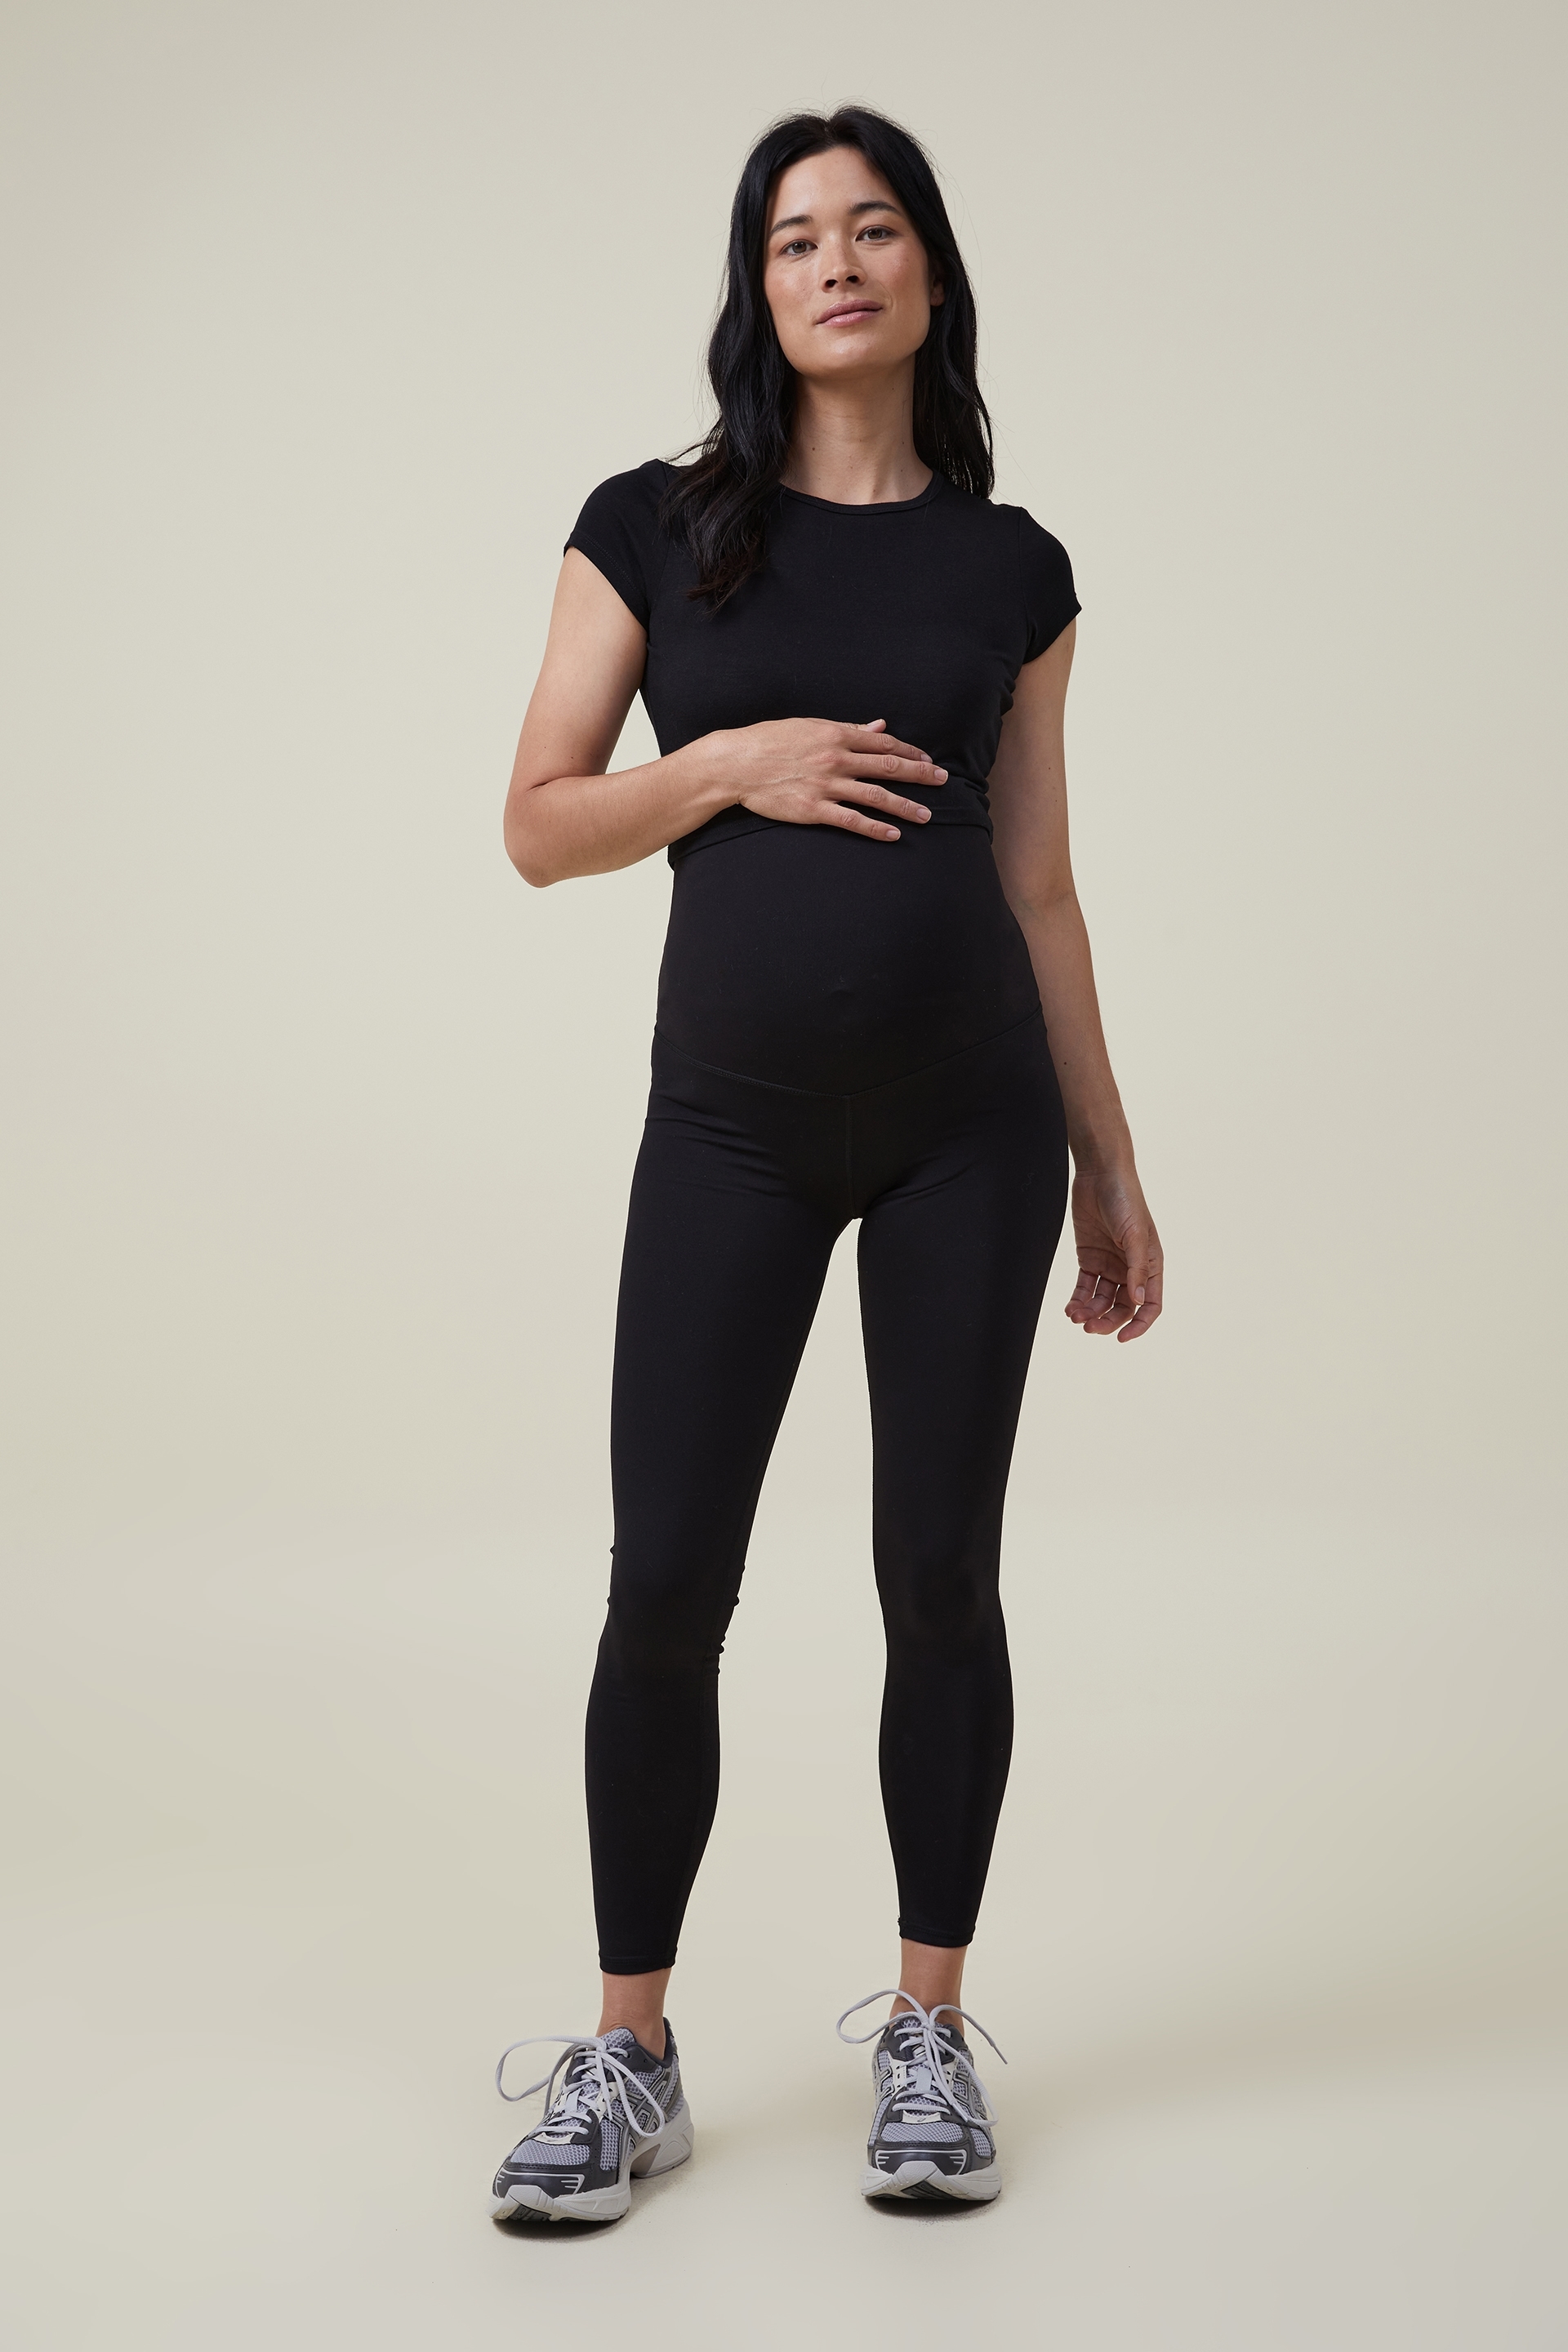 Cotton:On Maternity active leggings in black